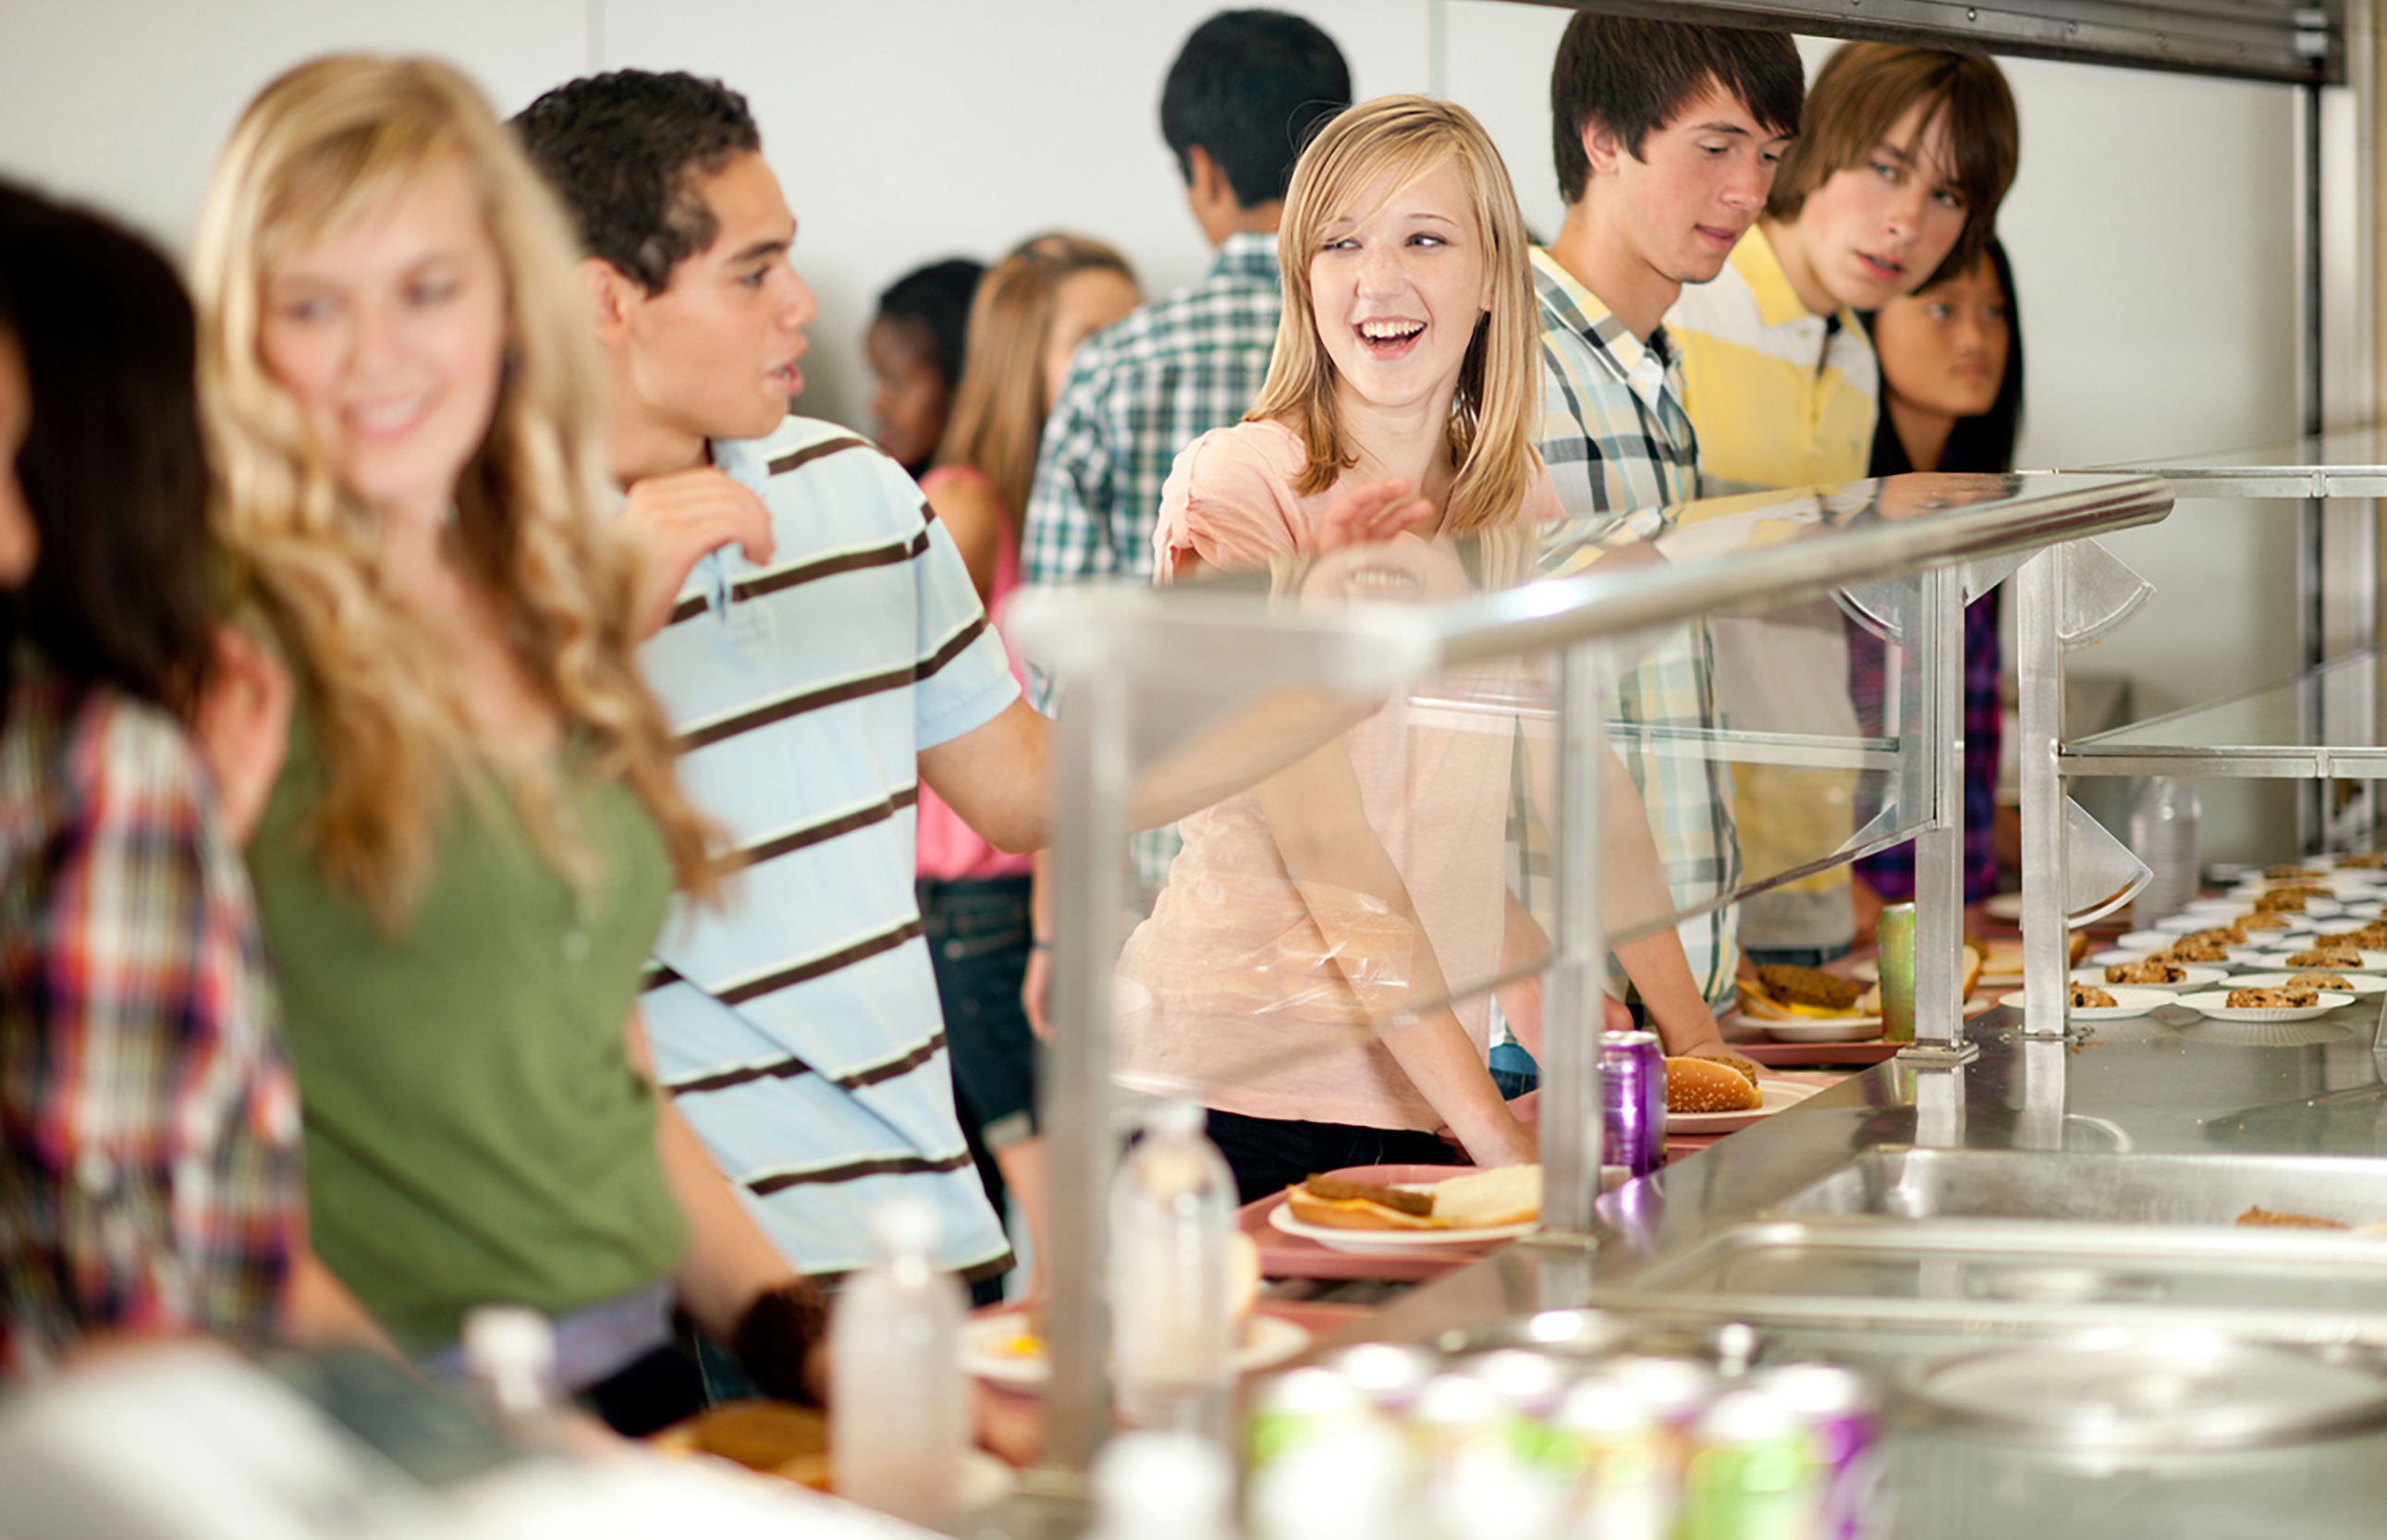 College meal plans can be pricey but the right moves can help make it more affordable.